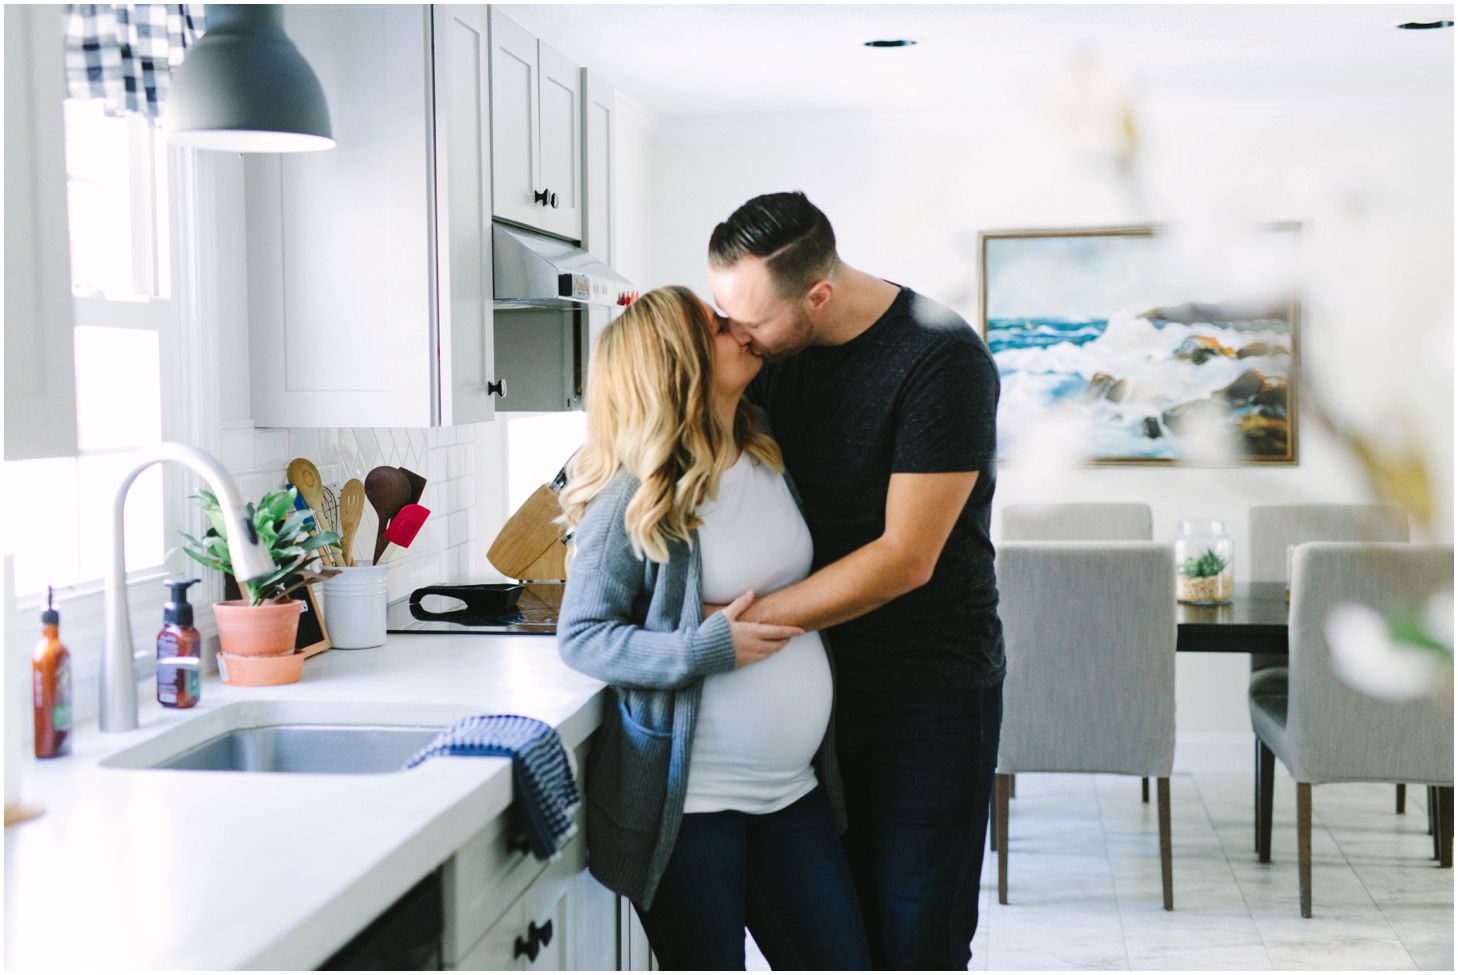 Pittsburgh In-home maternity photos